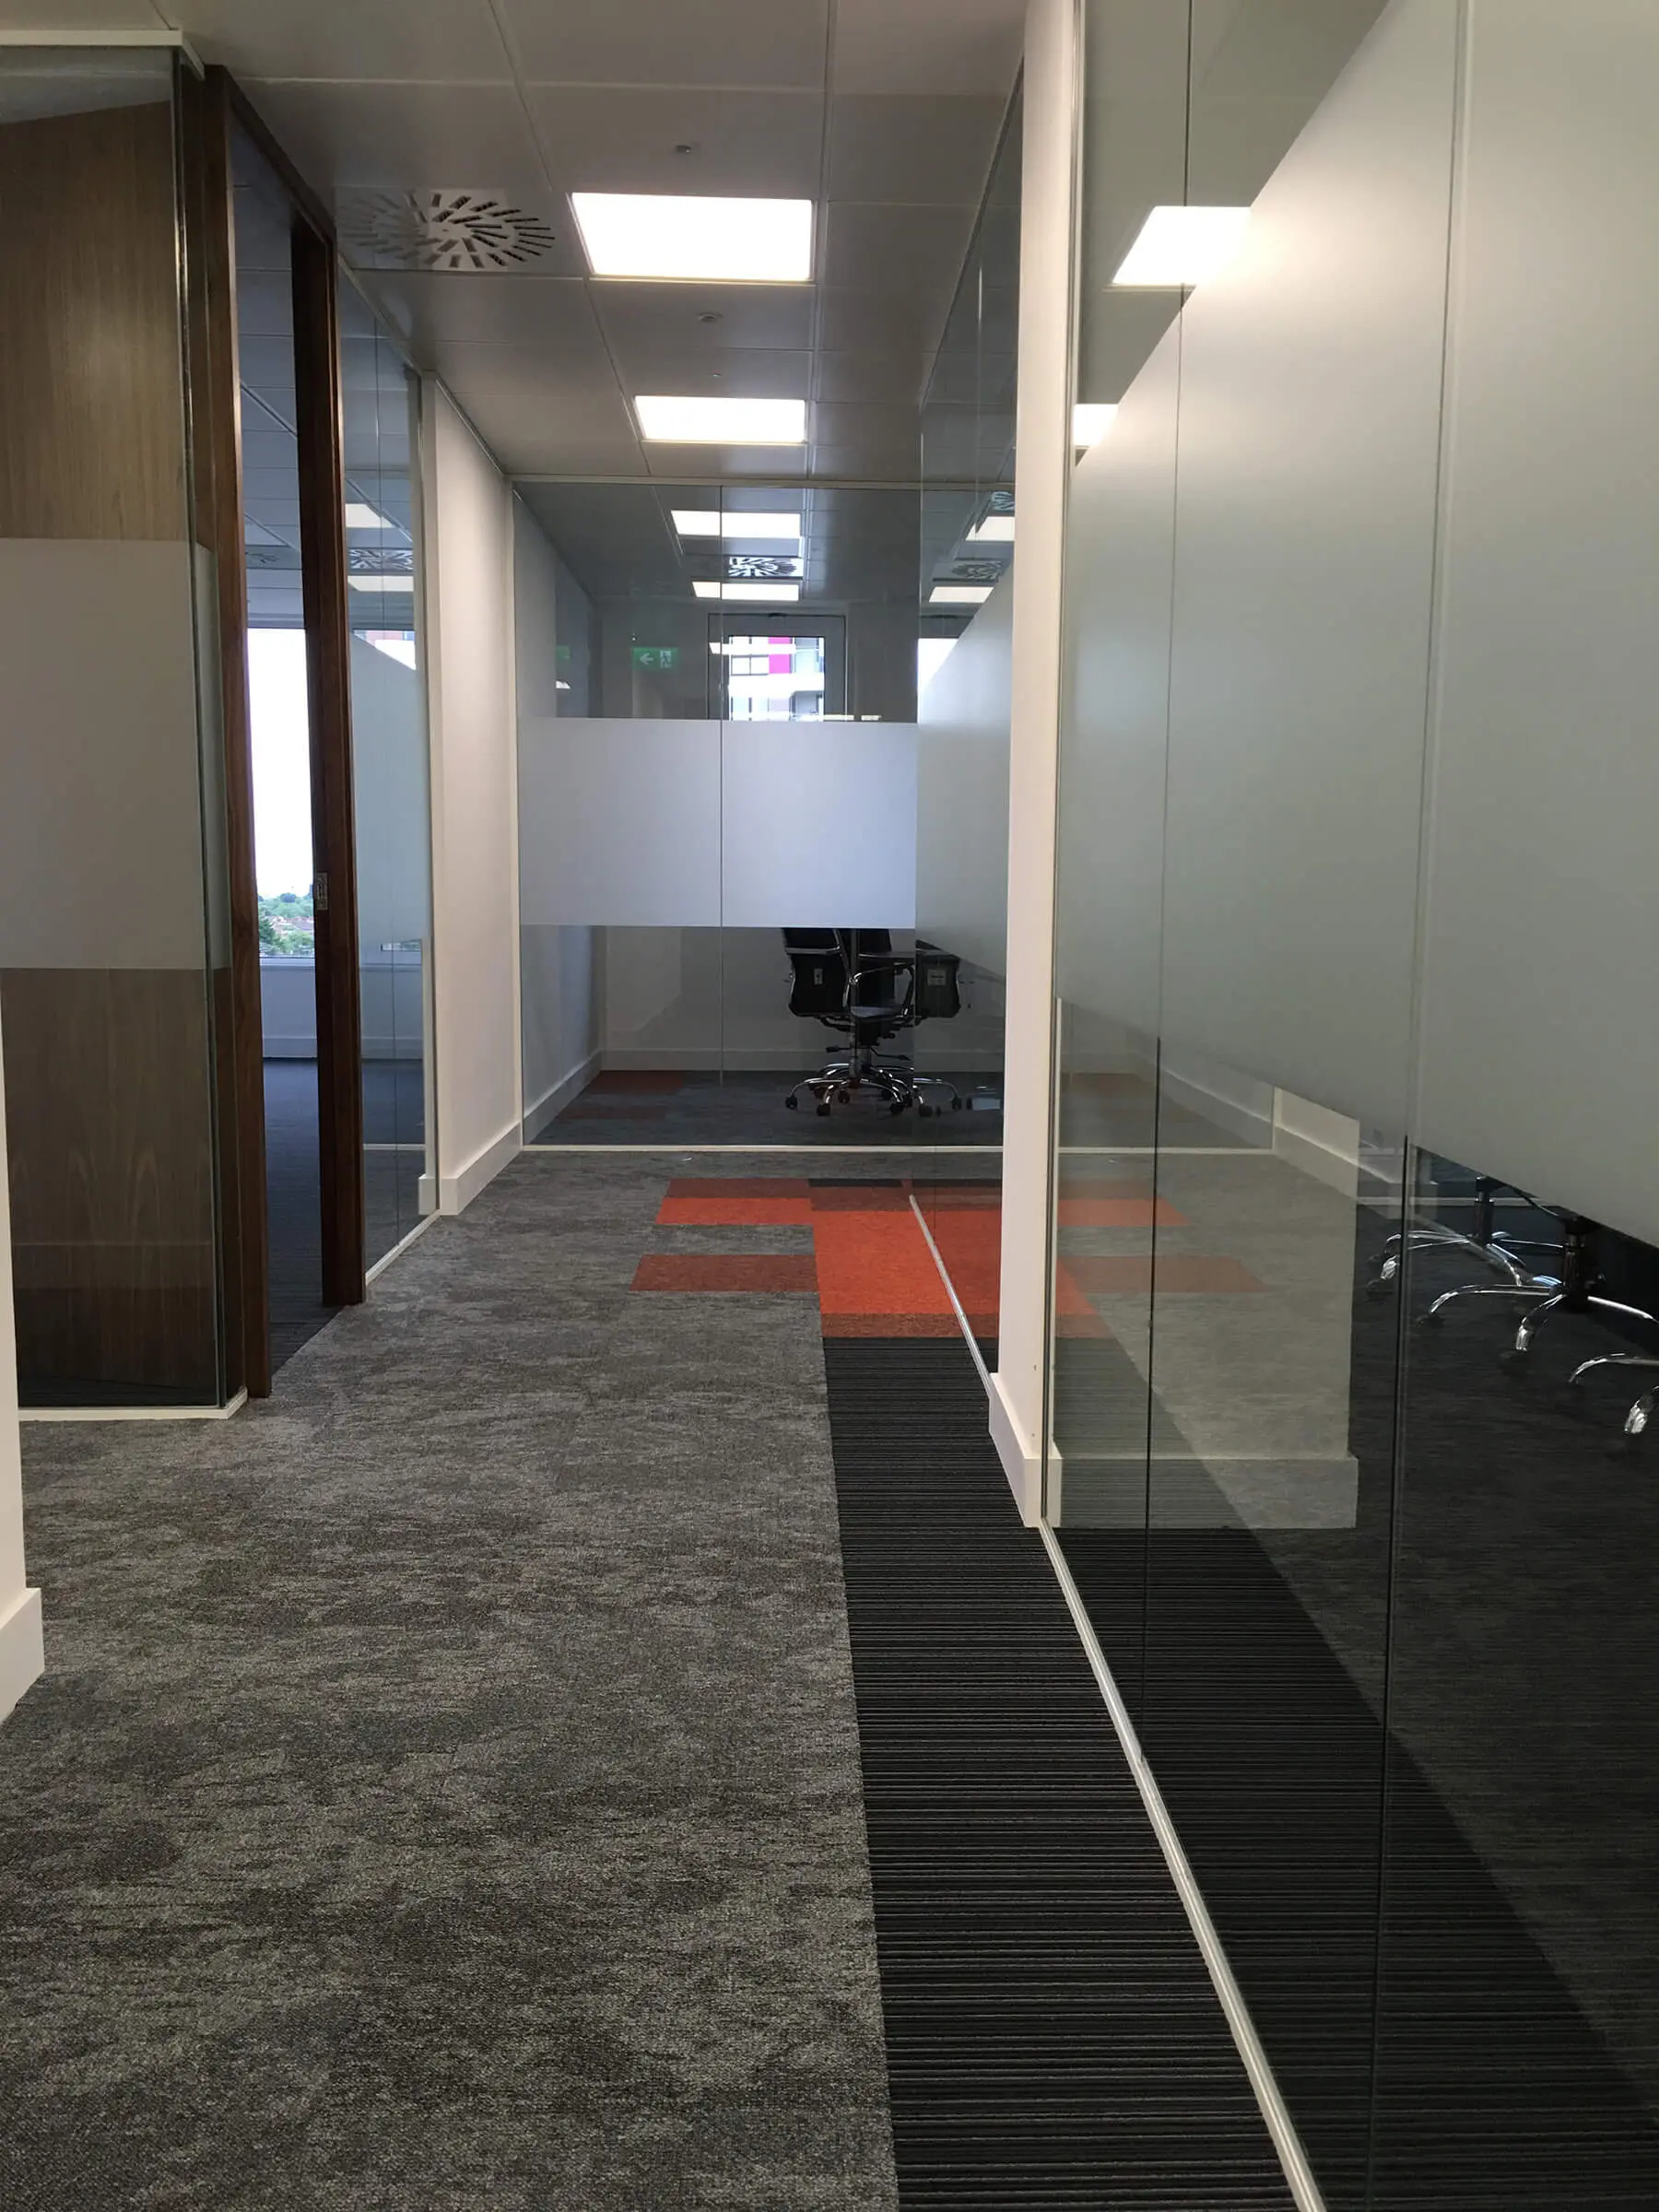 Designer office space divided with glass aprttions